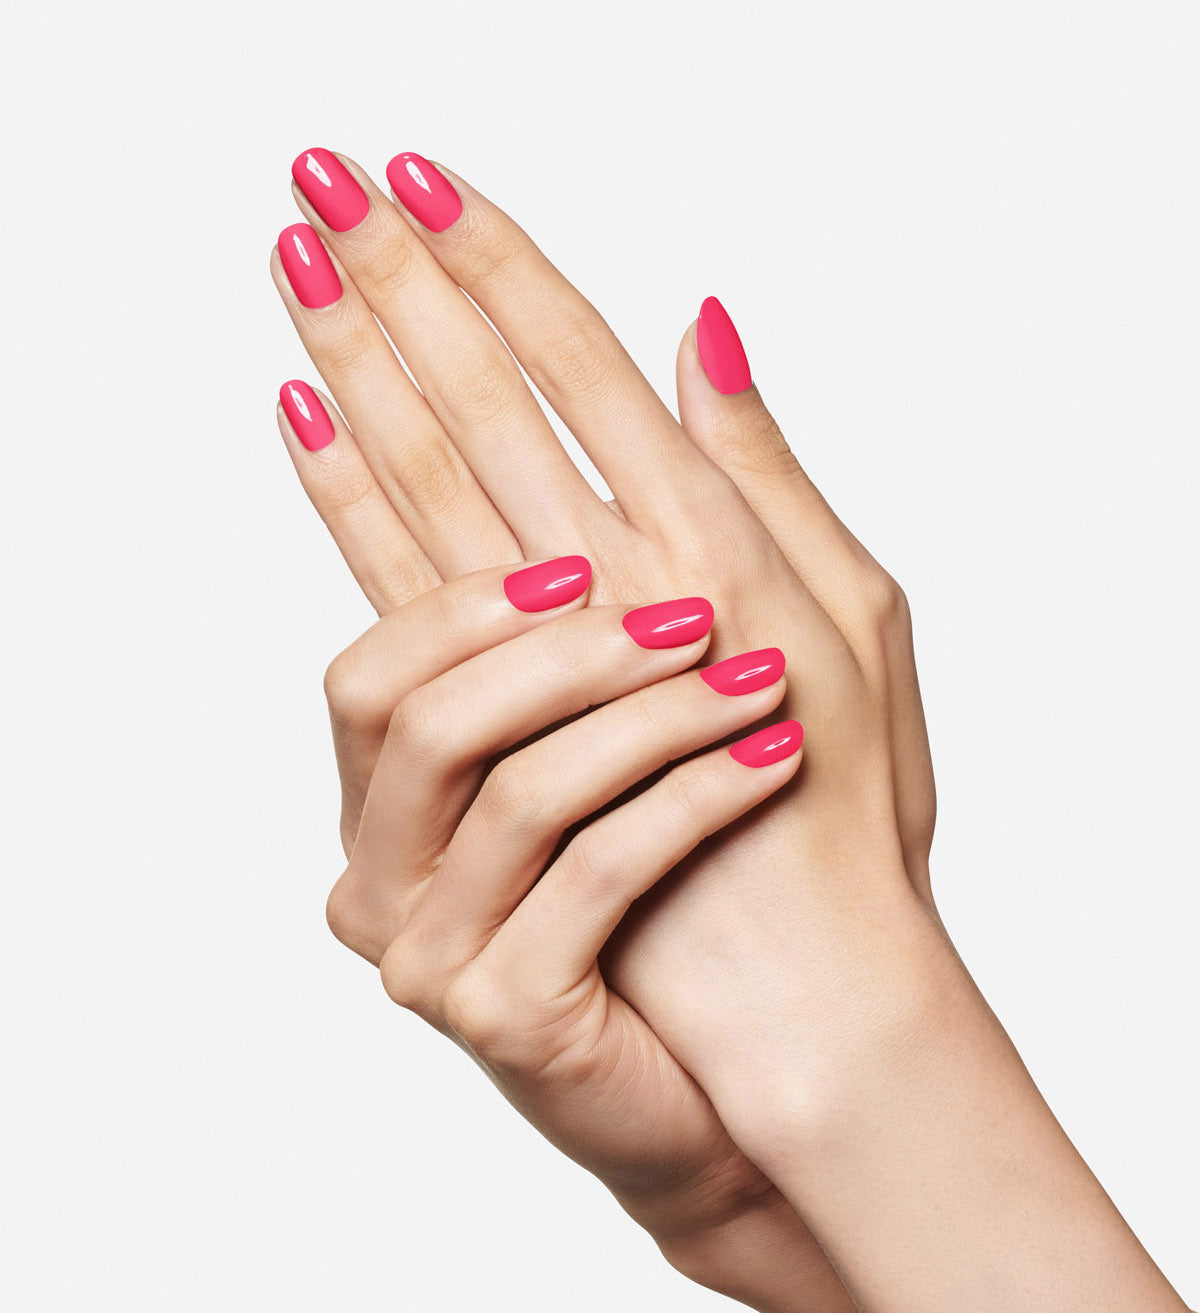 11 Nail Colours That Look Stunning On Deeper Skin Tones - Elle India